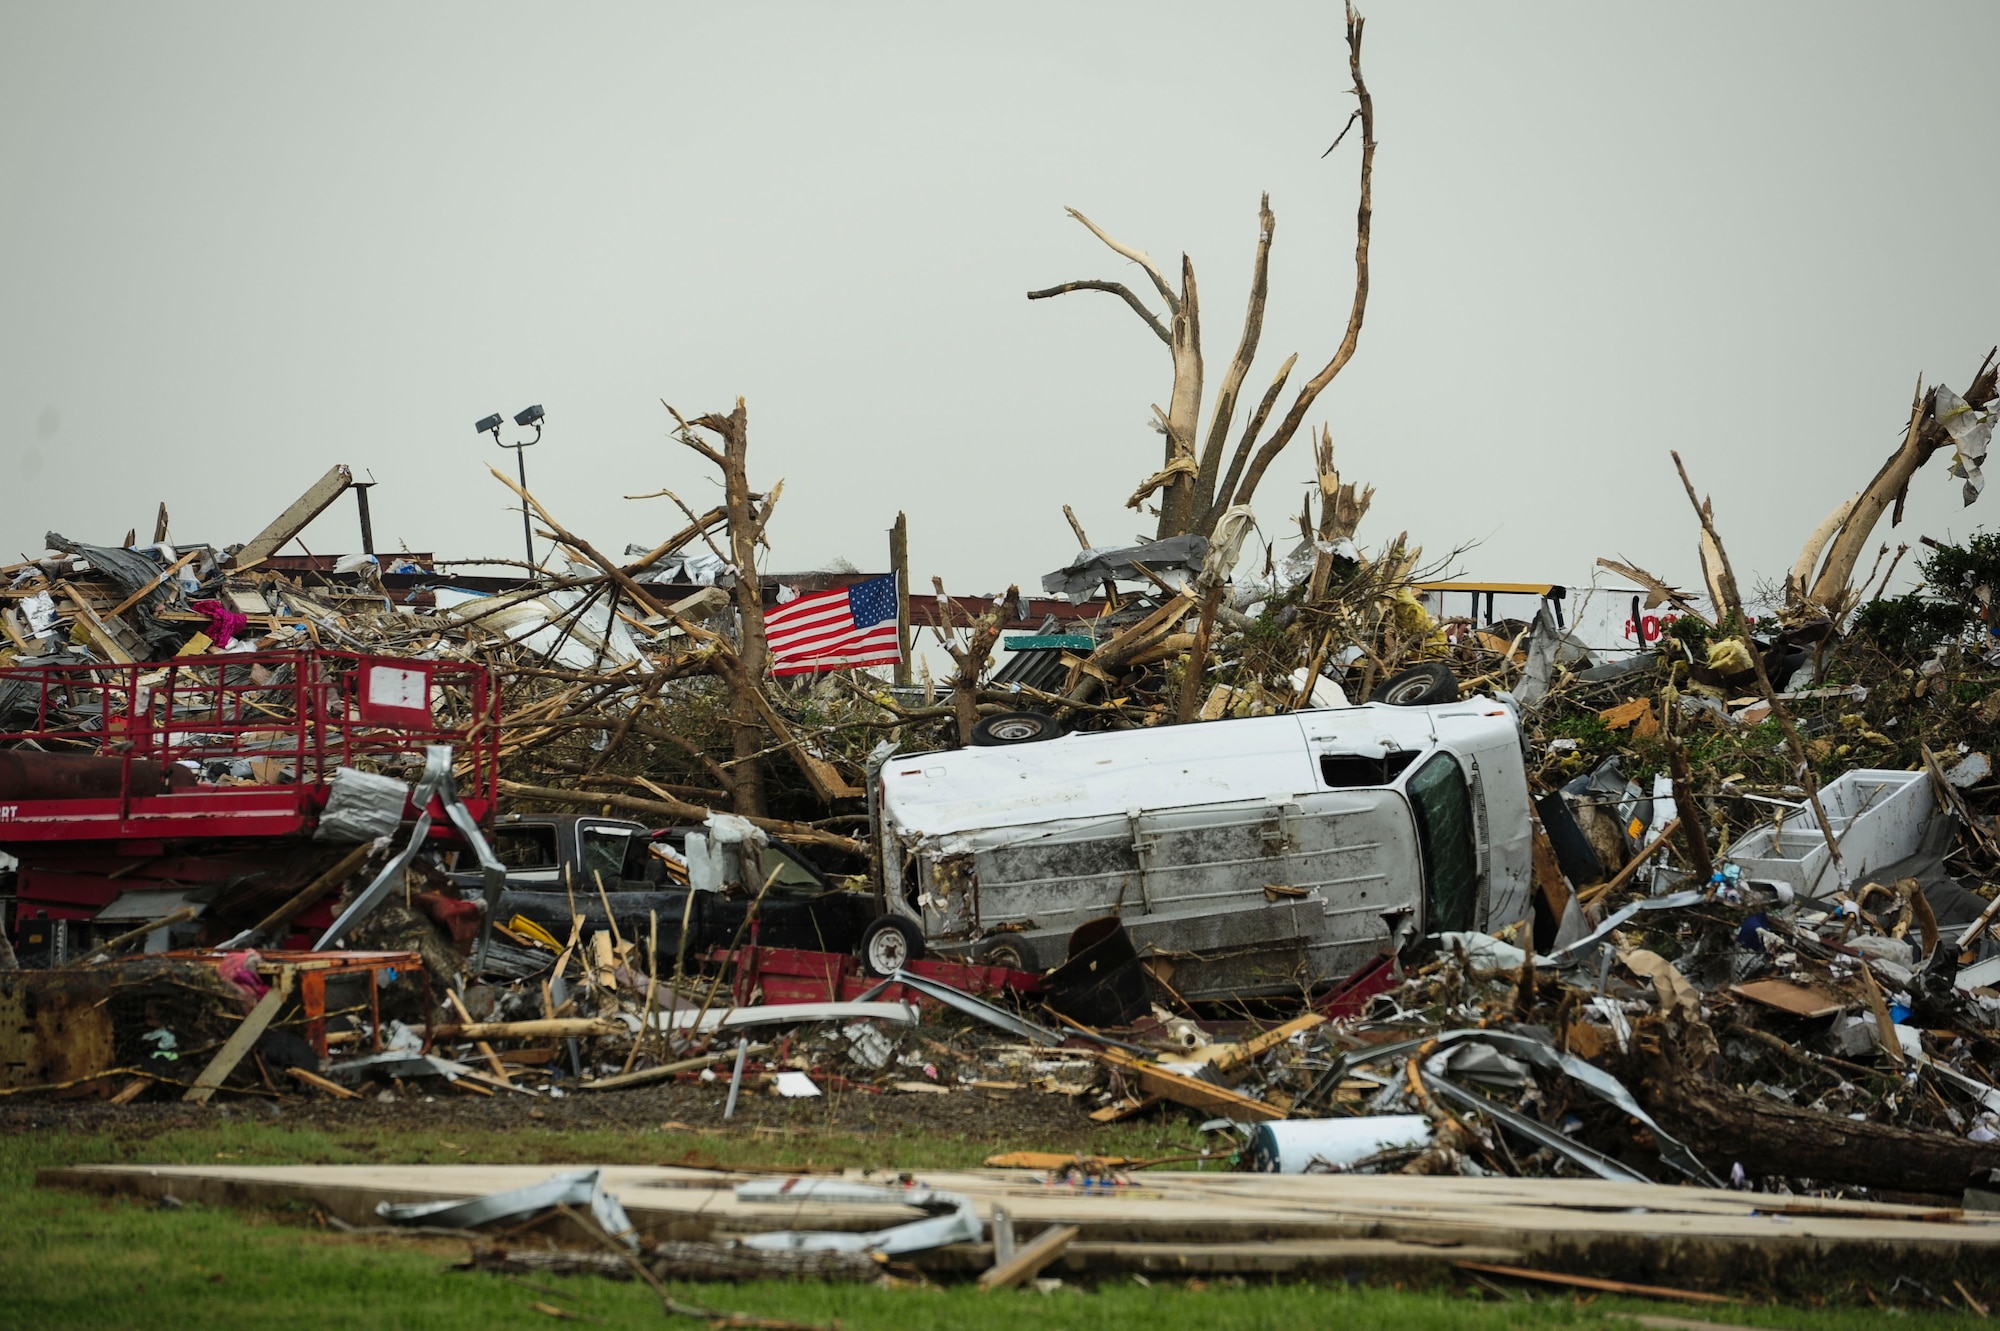 A tornado ripped through the Vilonia, Ark., April 27, 2014, killing at least 15 people, injuring dozens more and destroying multiple homes. Vilonia is approximately 20 miles away from Little Rock Air Force Base, Ark. (U.S. Air Force photo/Senior Airman Kaylee Clark)